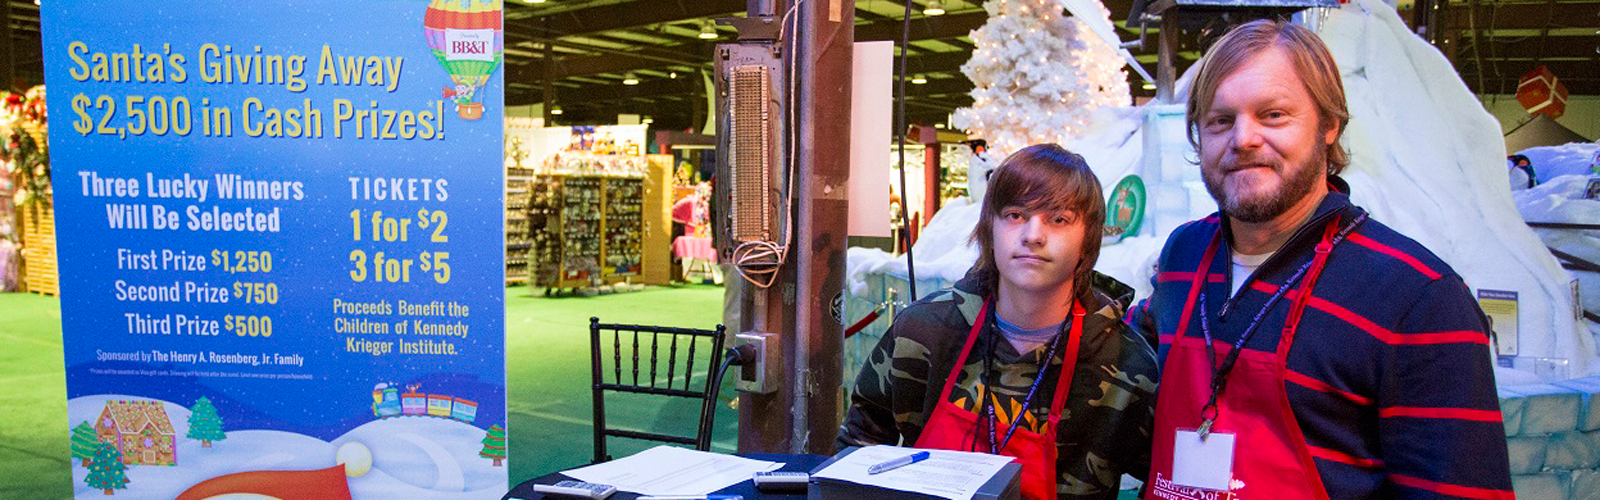 Two volunteers at Festival of Trees.